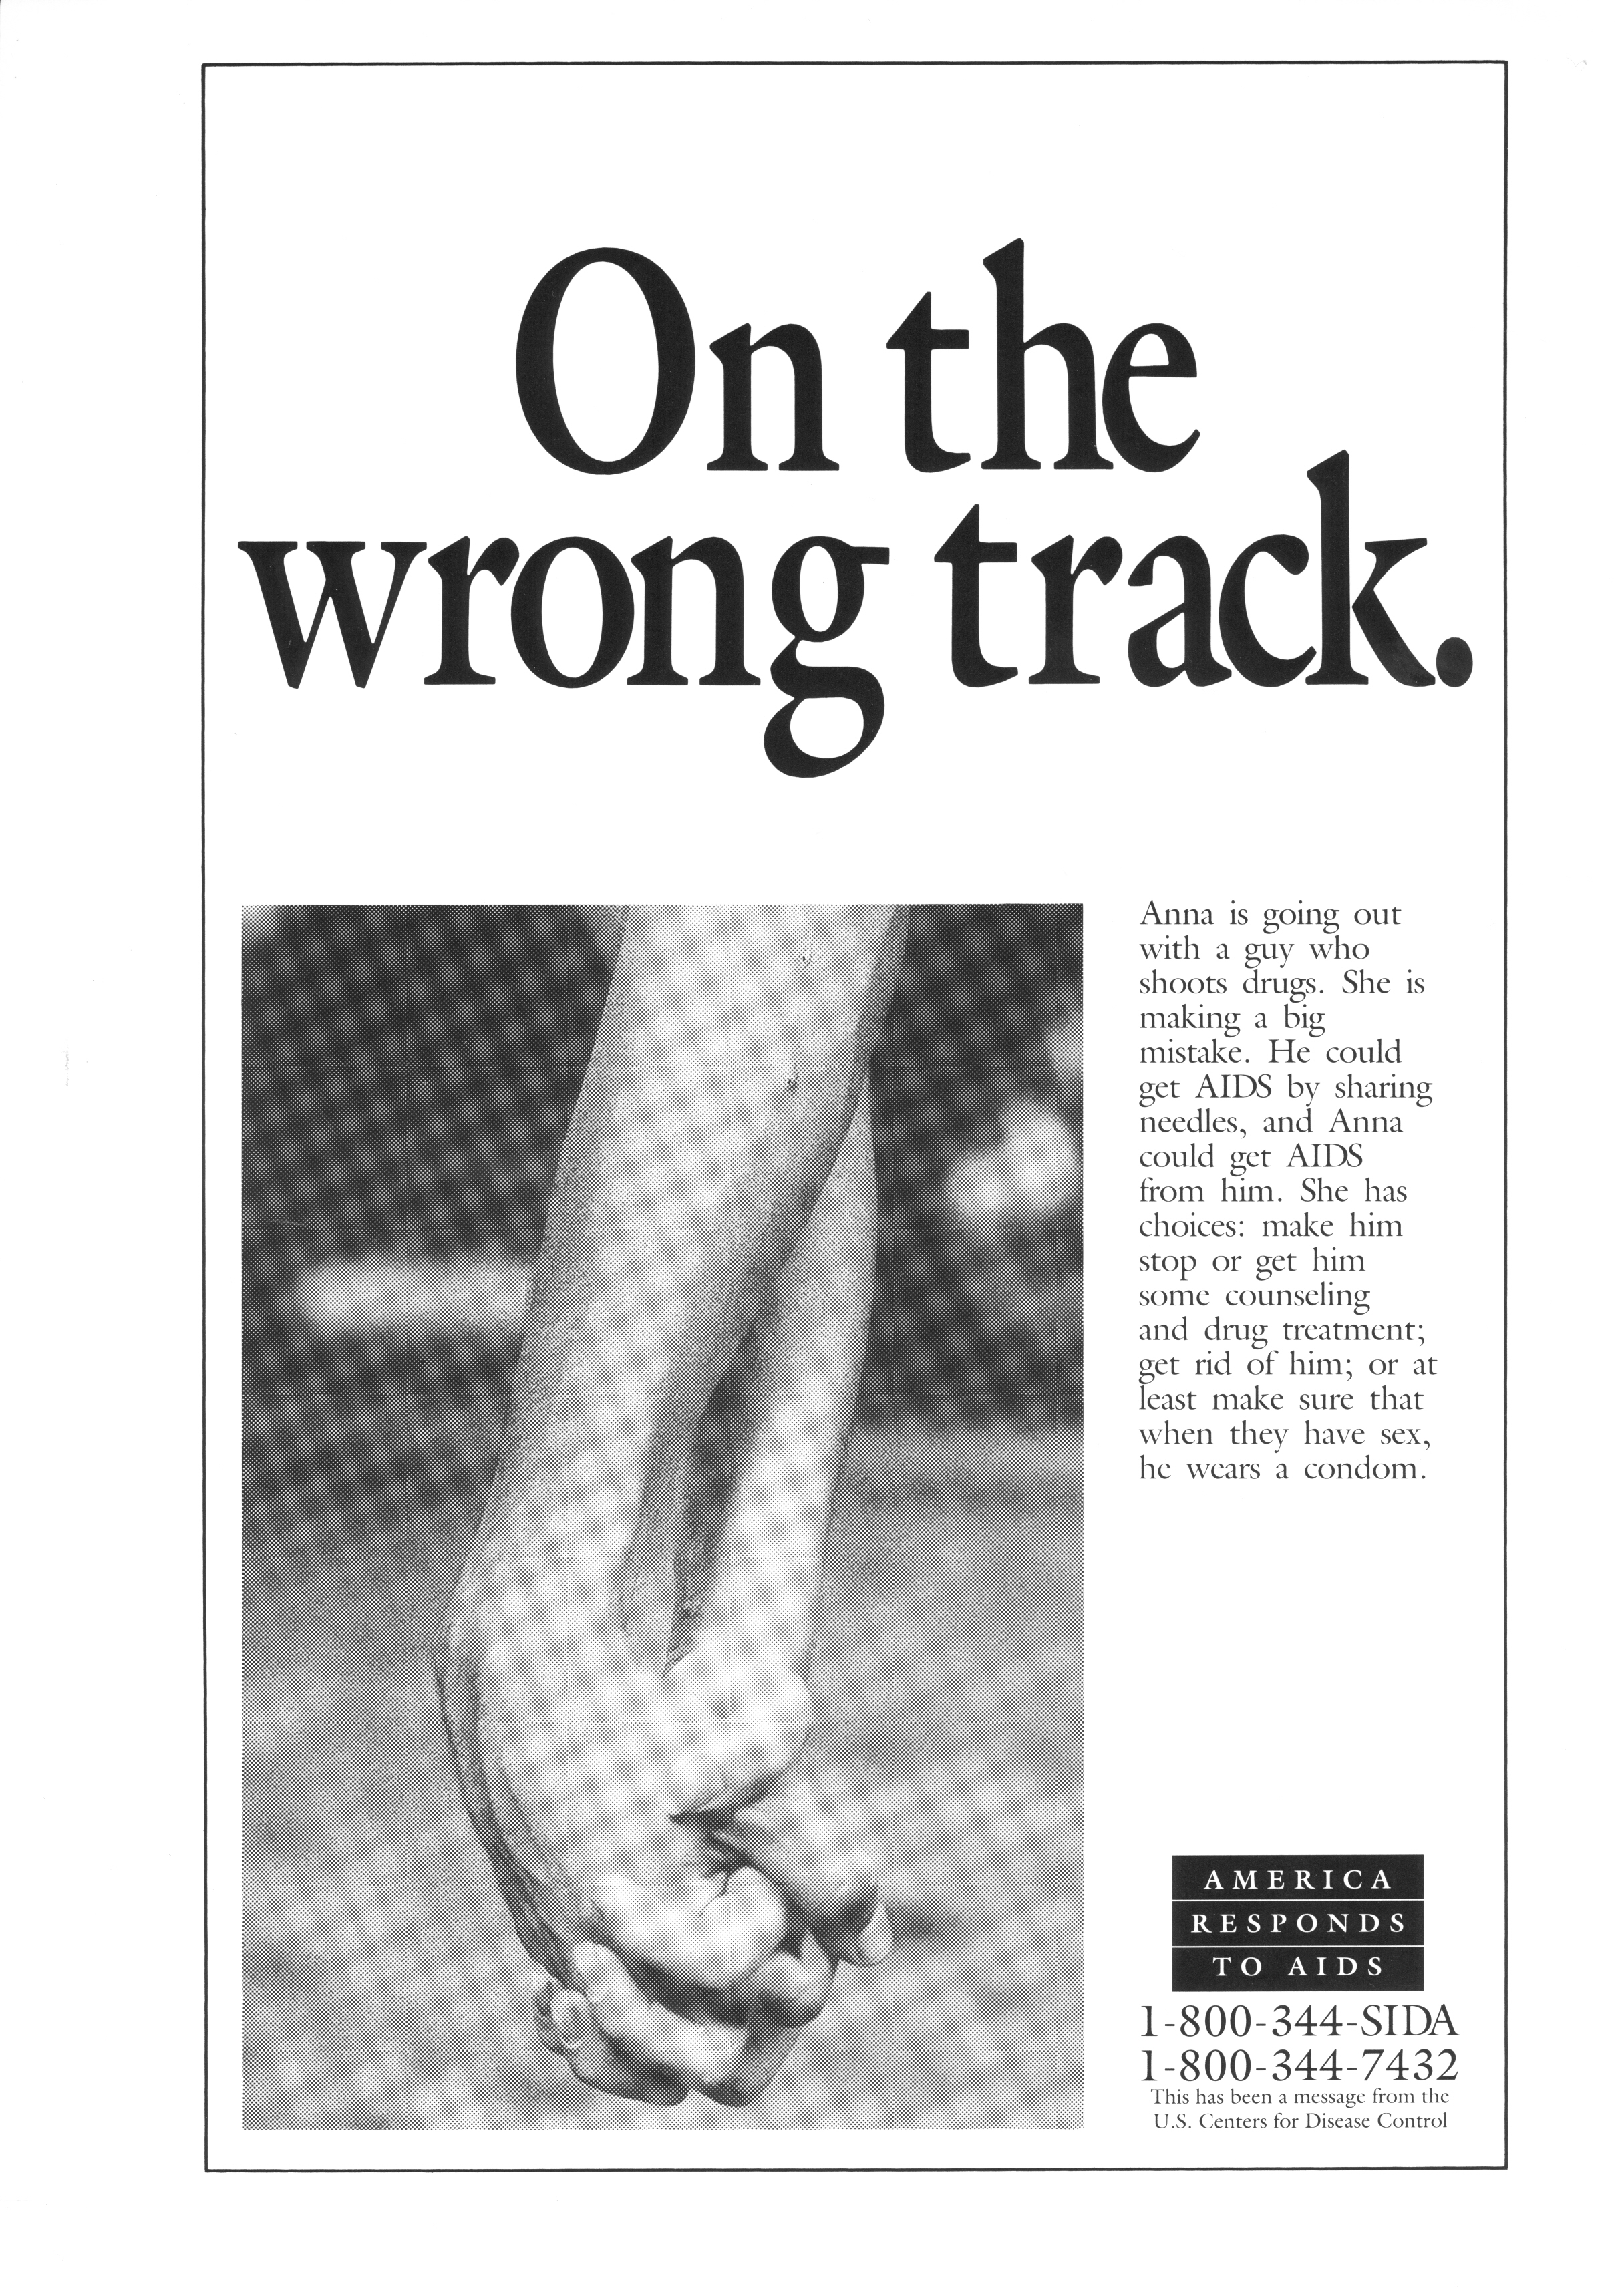 On the wrong track